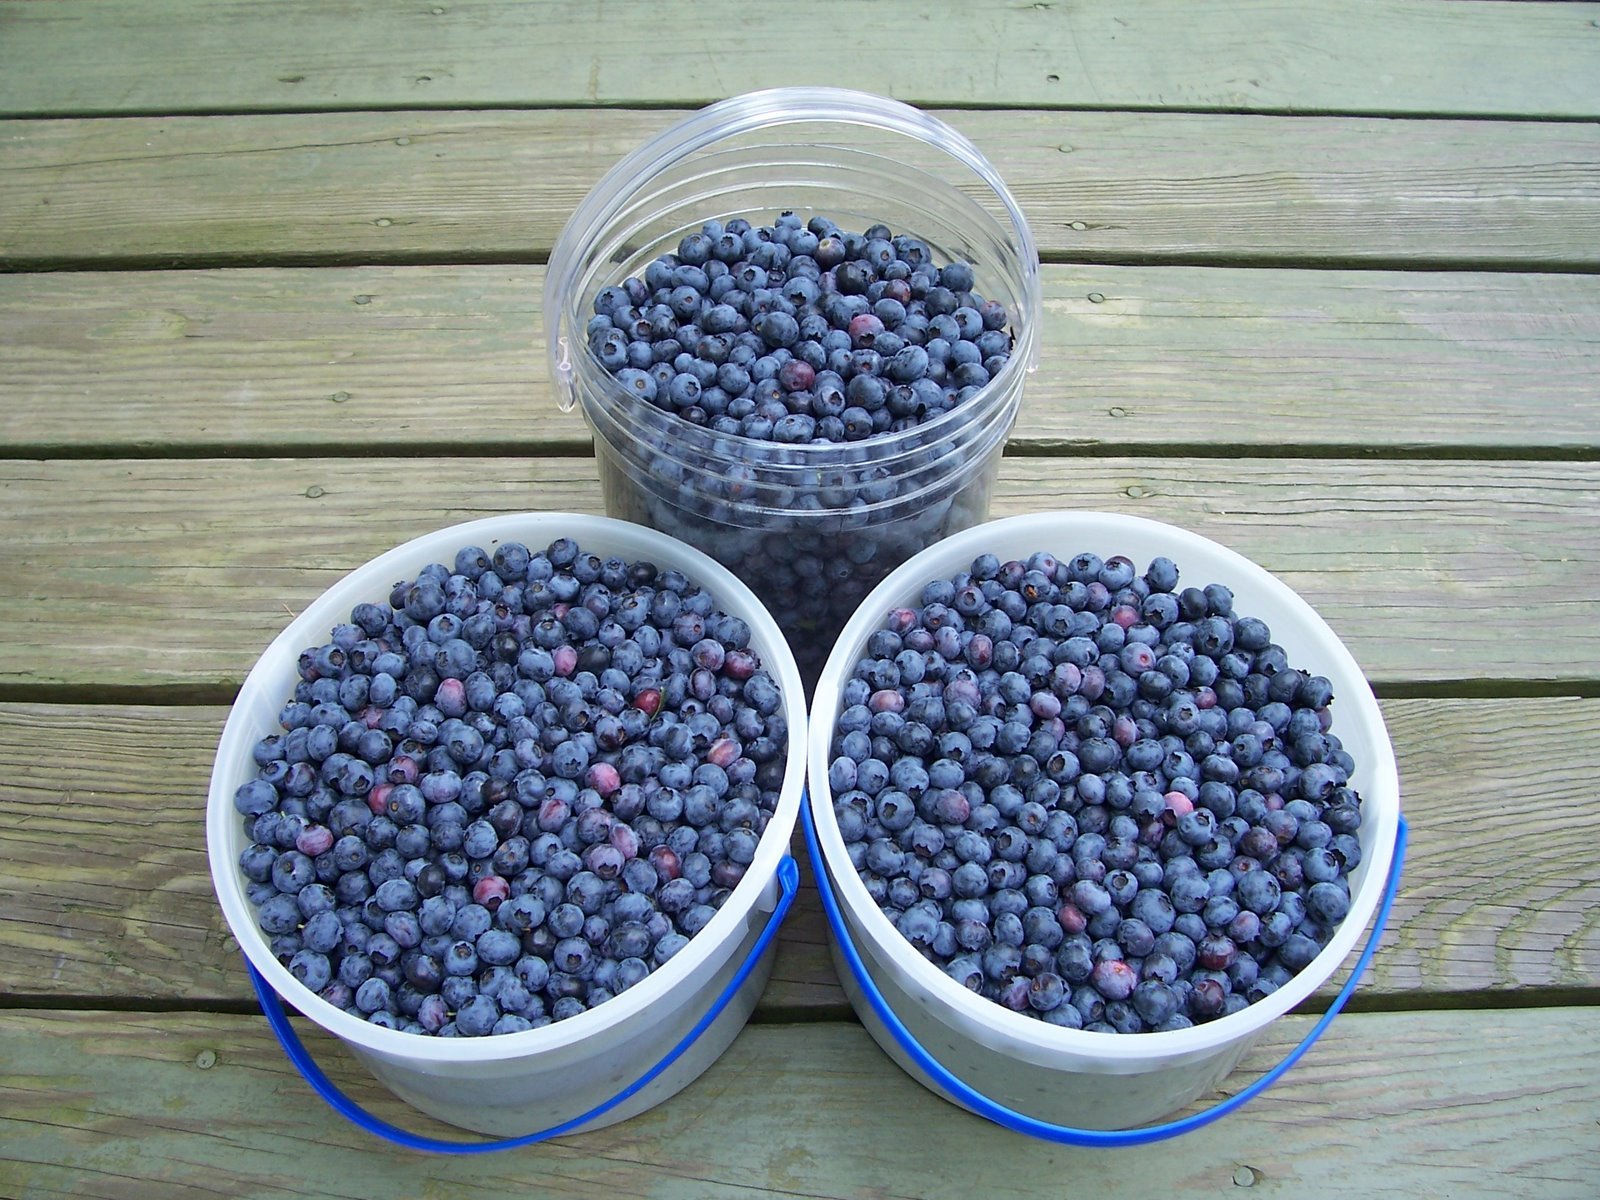 Buckets of fresh picked blueberries.